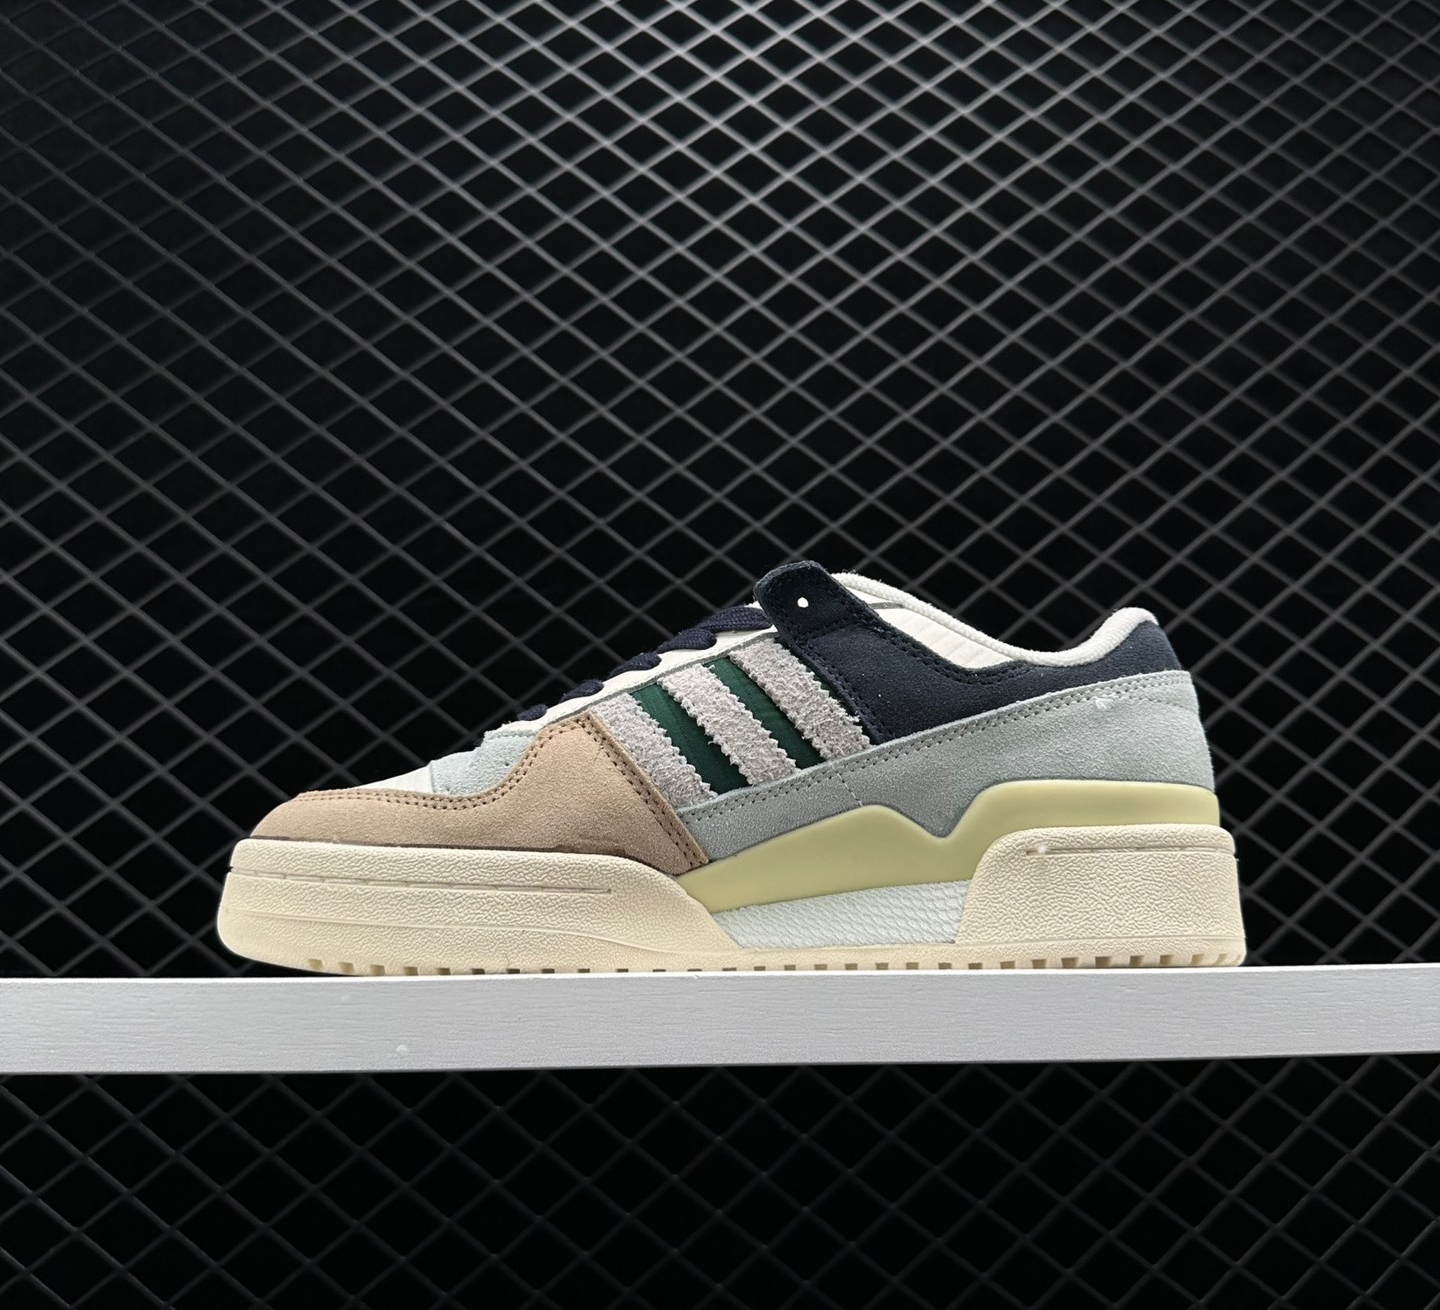 Adidas Forum 84 Low 'Beige Navy Green' - Shop the Latest Collection Now!